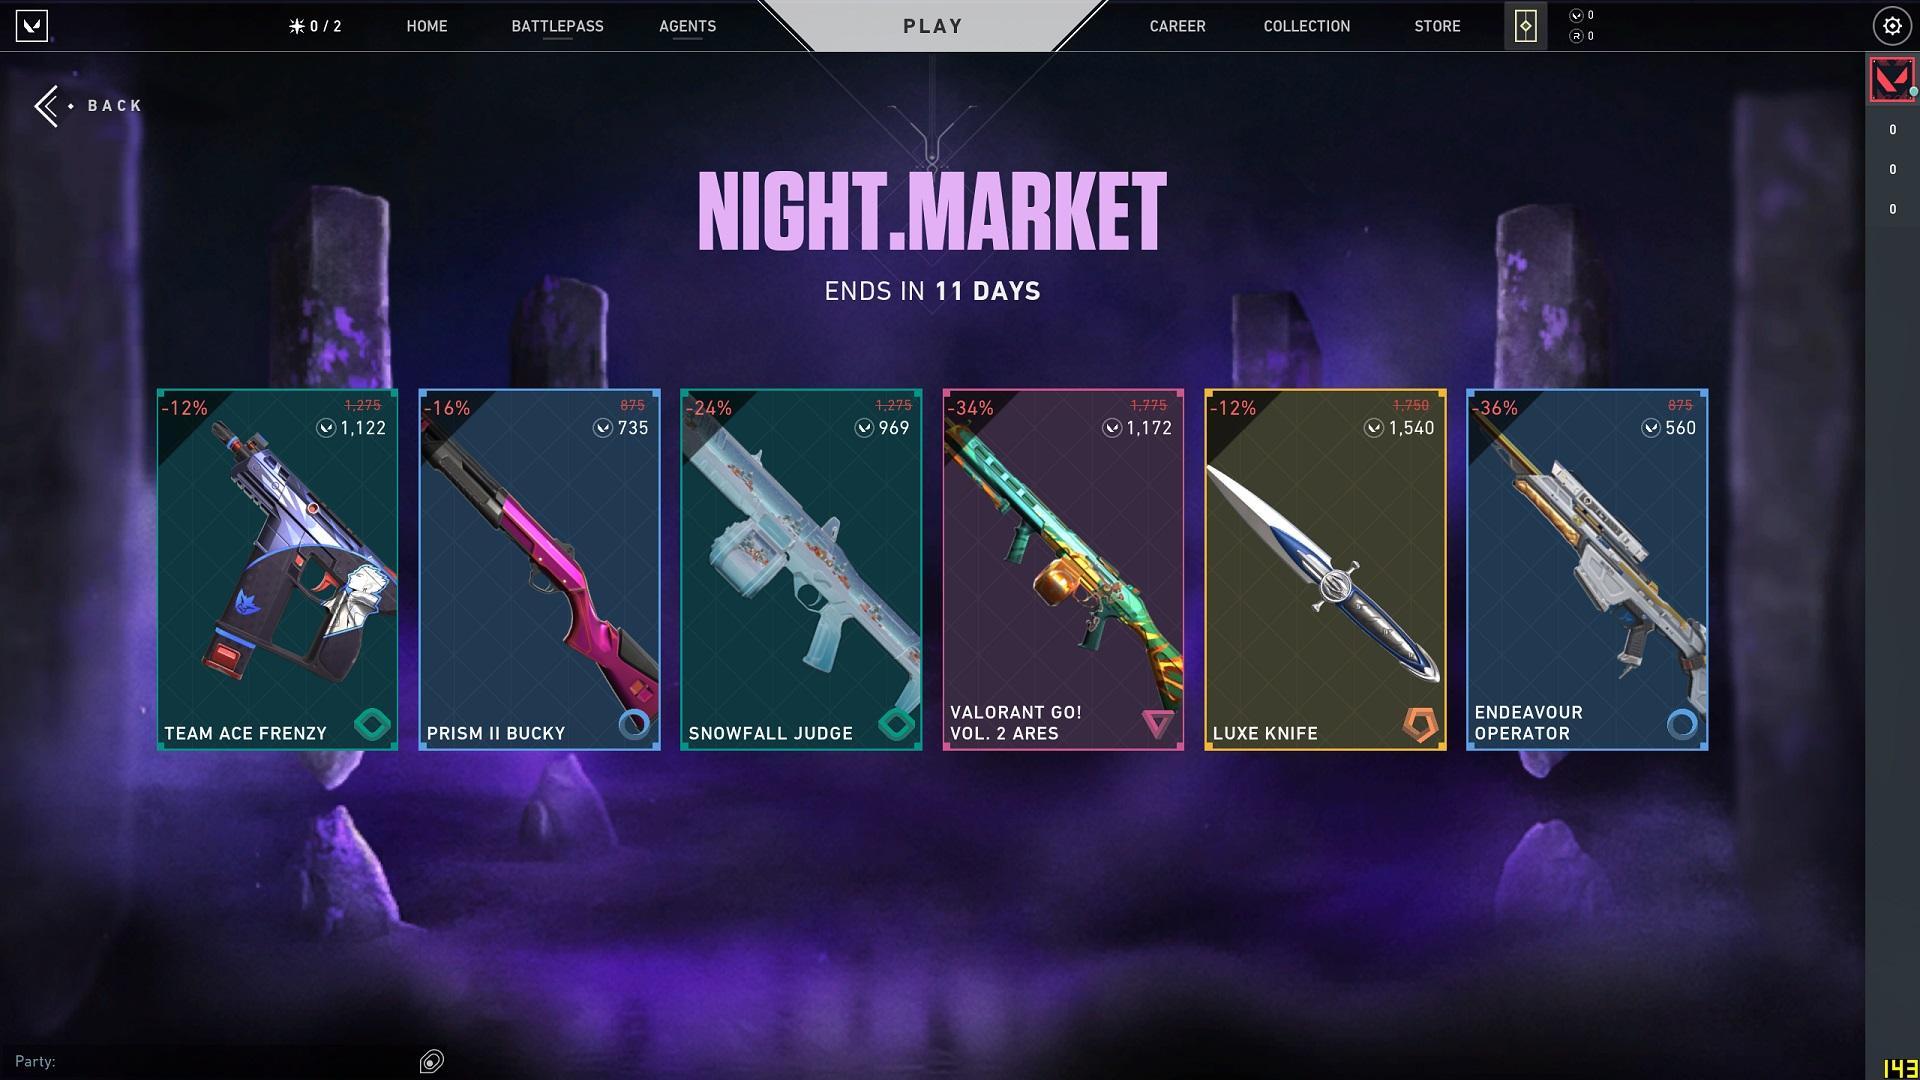 Valorant Night Market new skins: The spooky, ghostly Soulstrife skins on all gun types